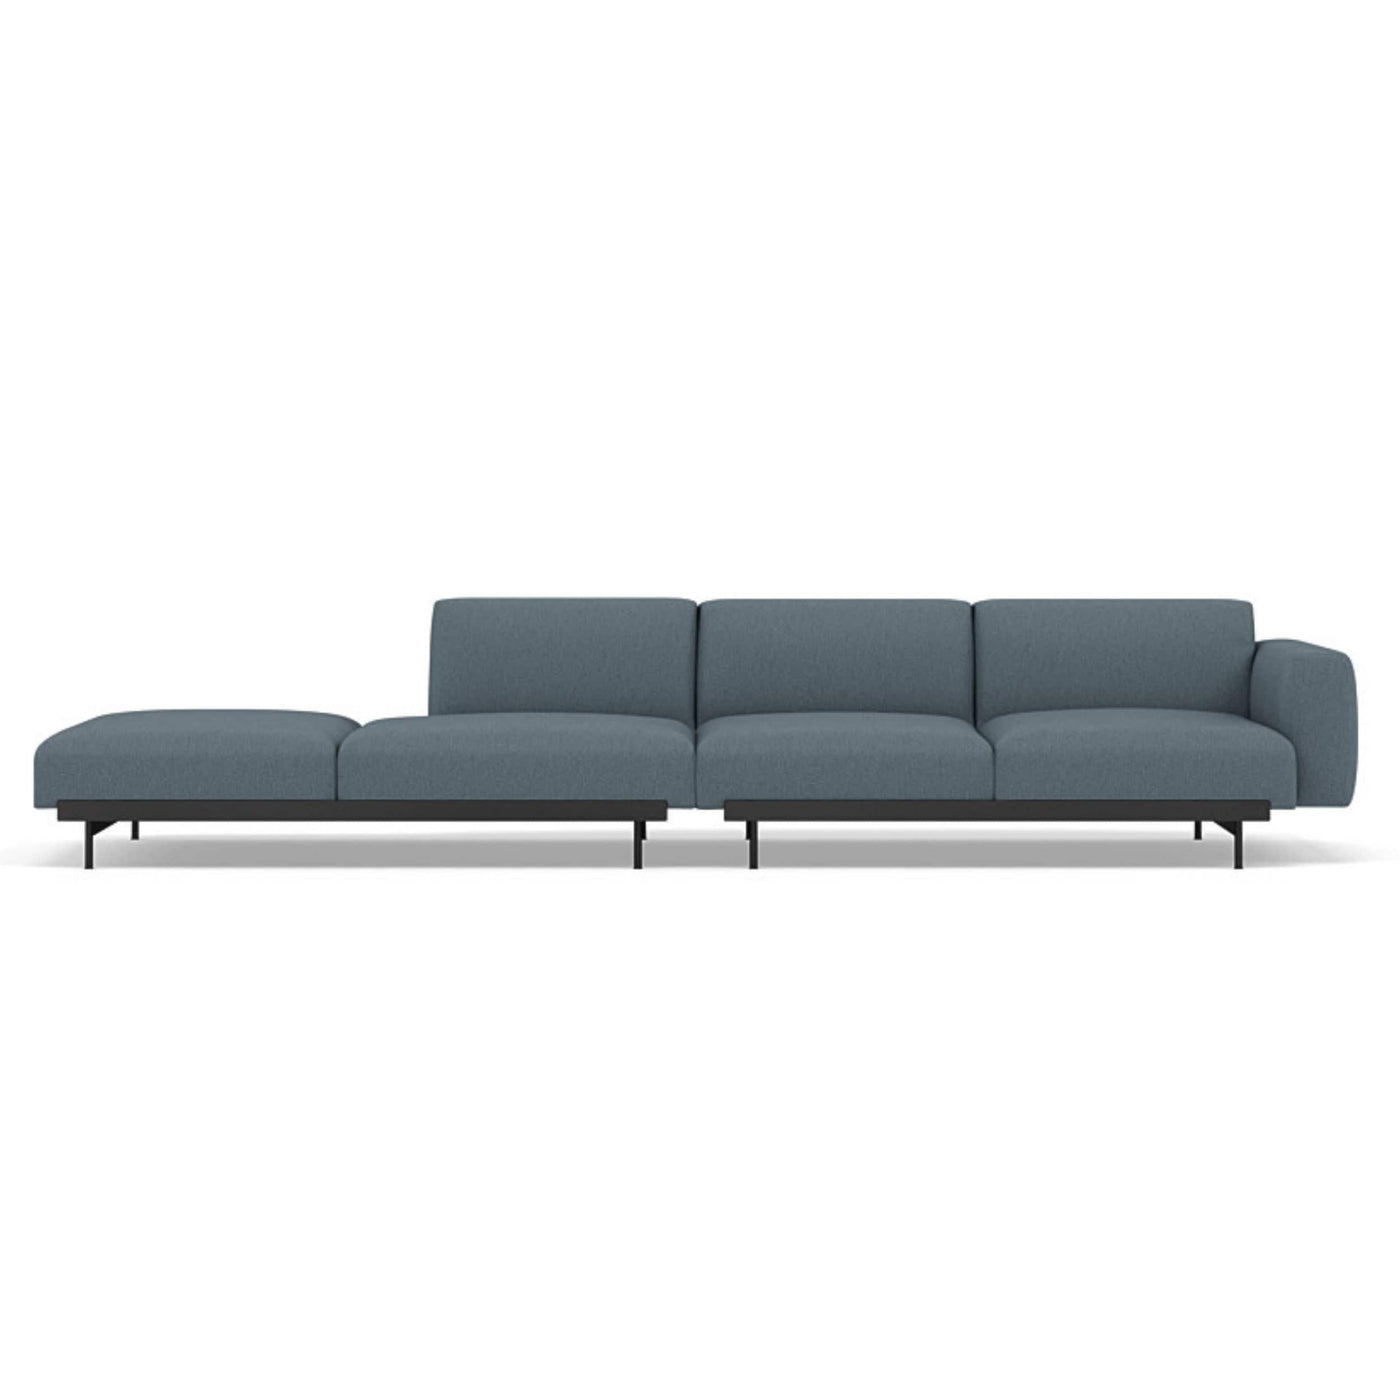 Muuto In Situ Modular 4 Seater Sofa configuration 3 in clay 1. Made to order from someday designs. #colour_clay-1-blue